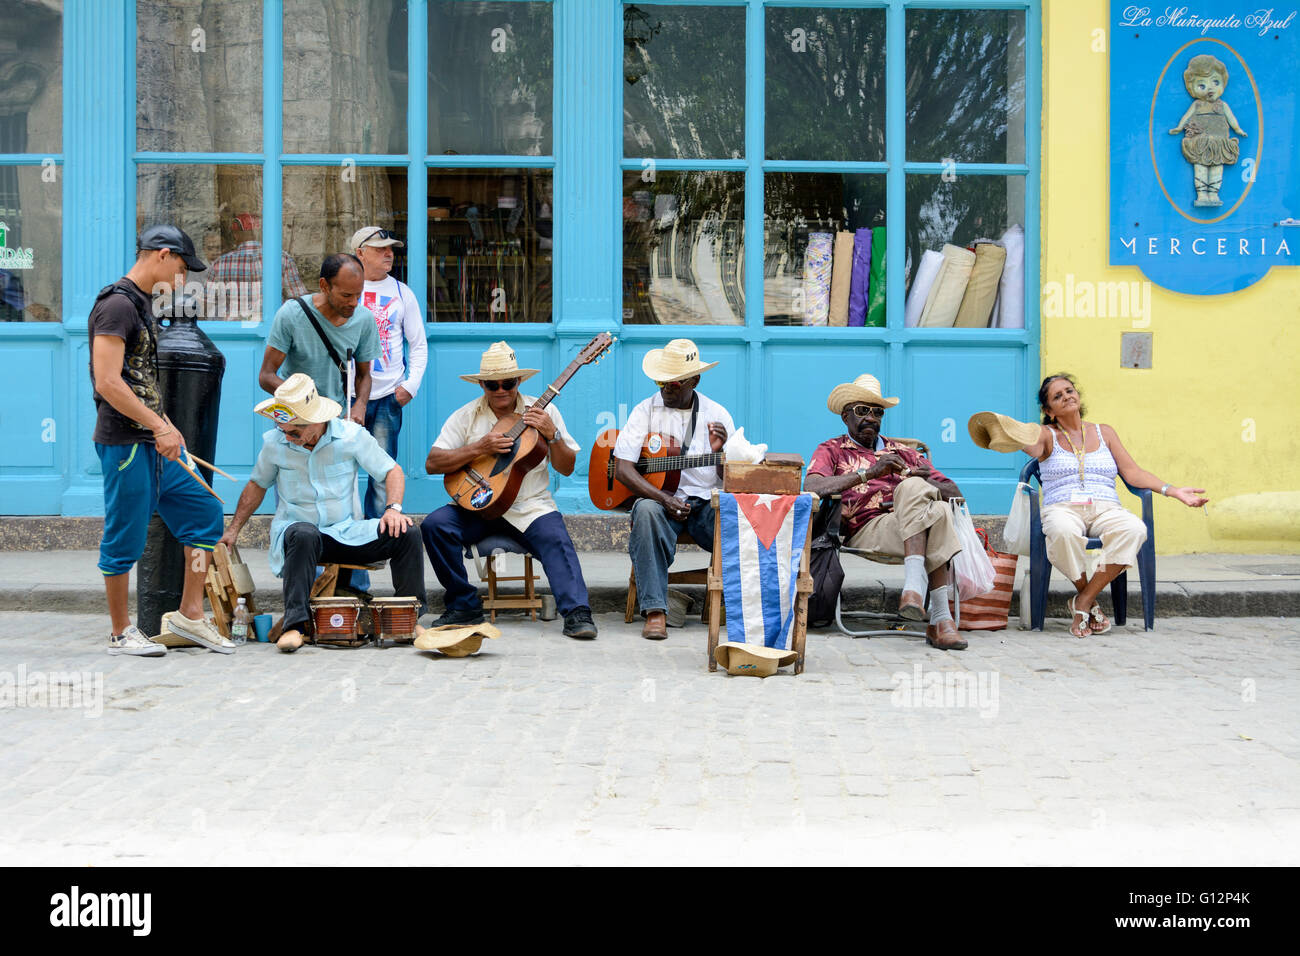 Street musicians perform for tourists and tips in Old Havana, Havana, Cuba Stock Photo